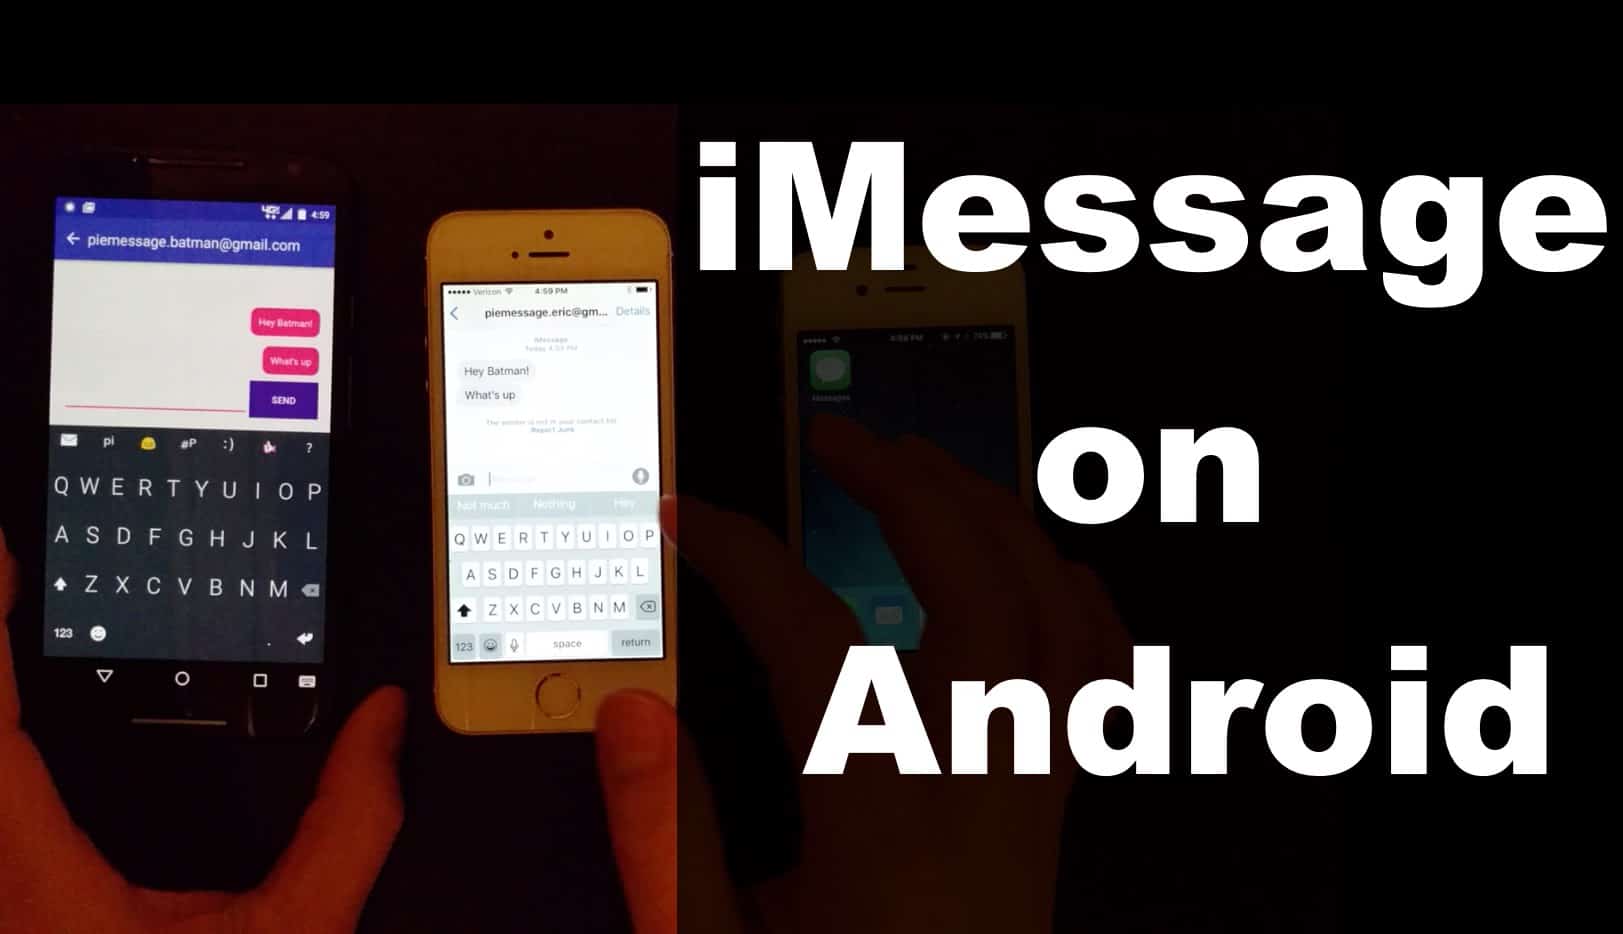 How to Use Apple’s iMessage in Your Own Android Device